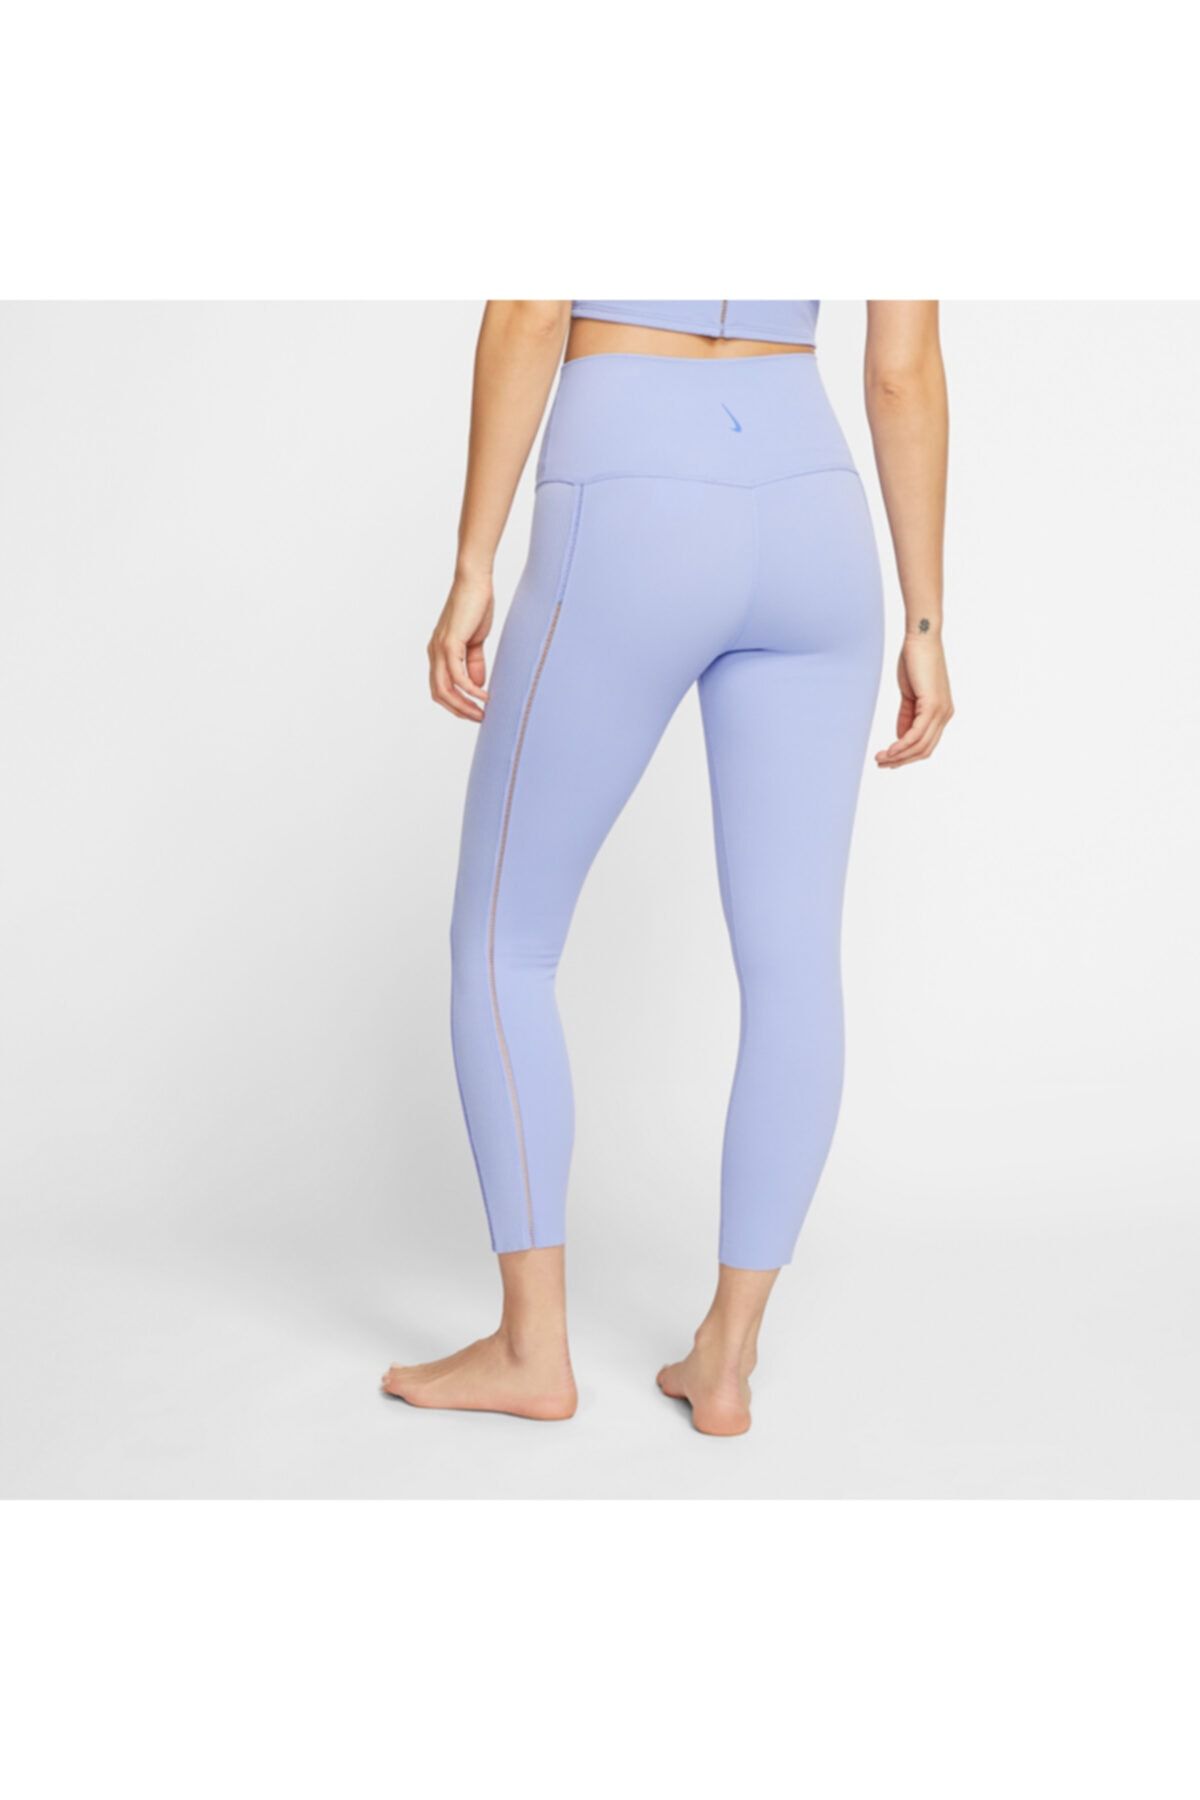 Nike Yoga Luxe Infinalon Colorful 7/8 Tights - Trendyol